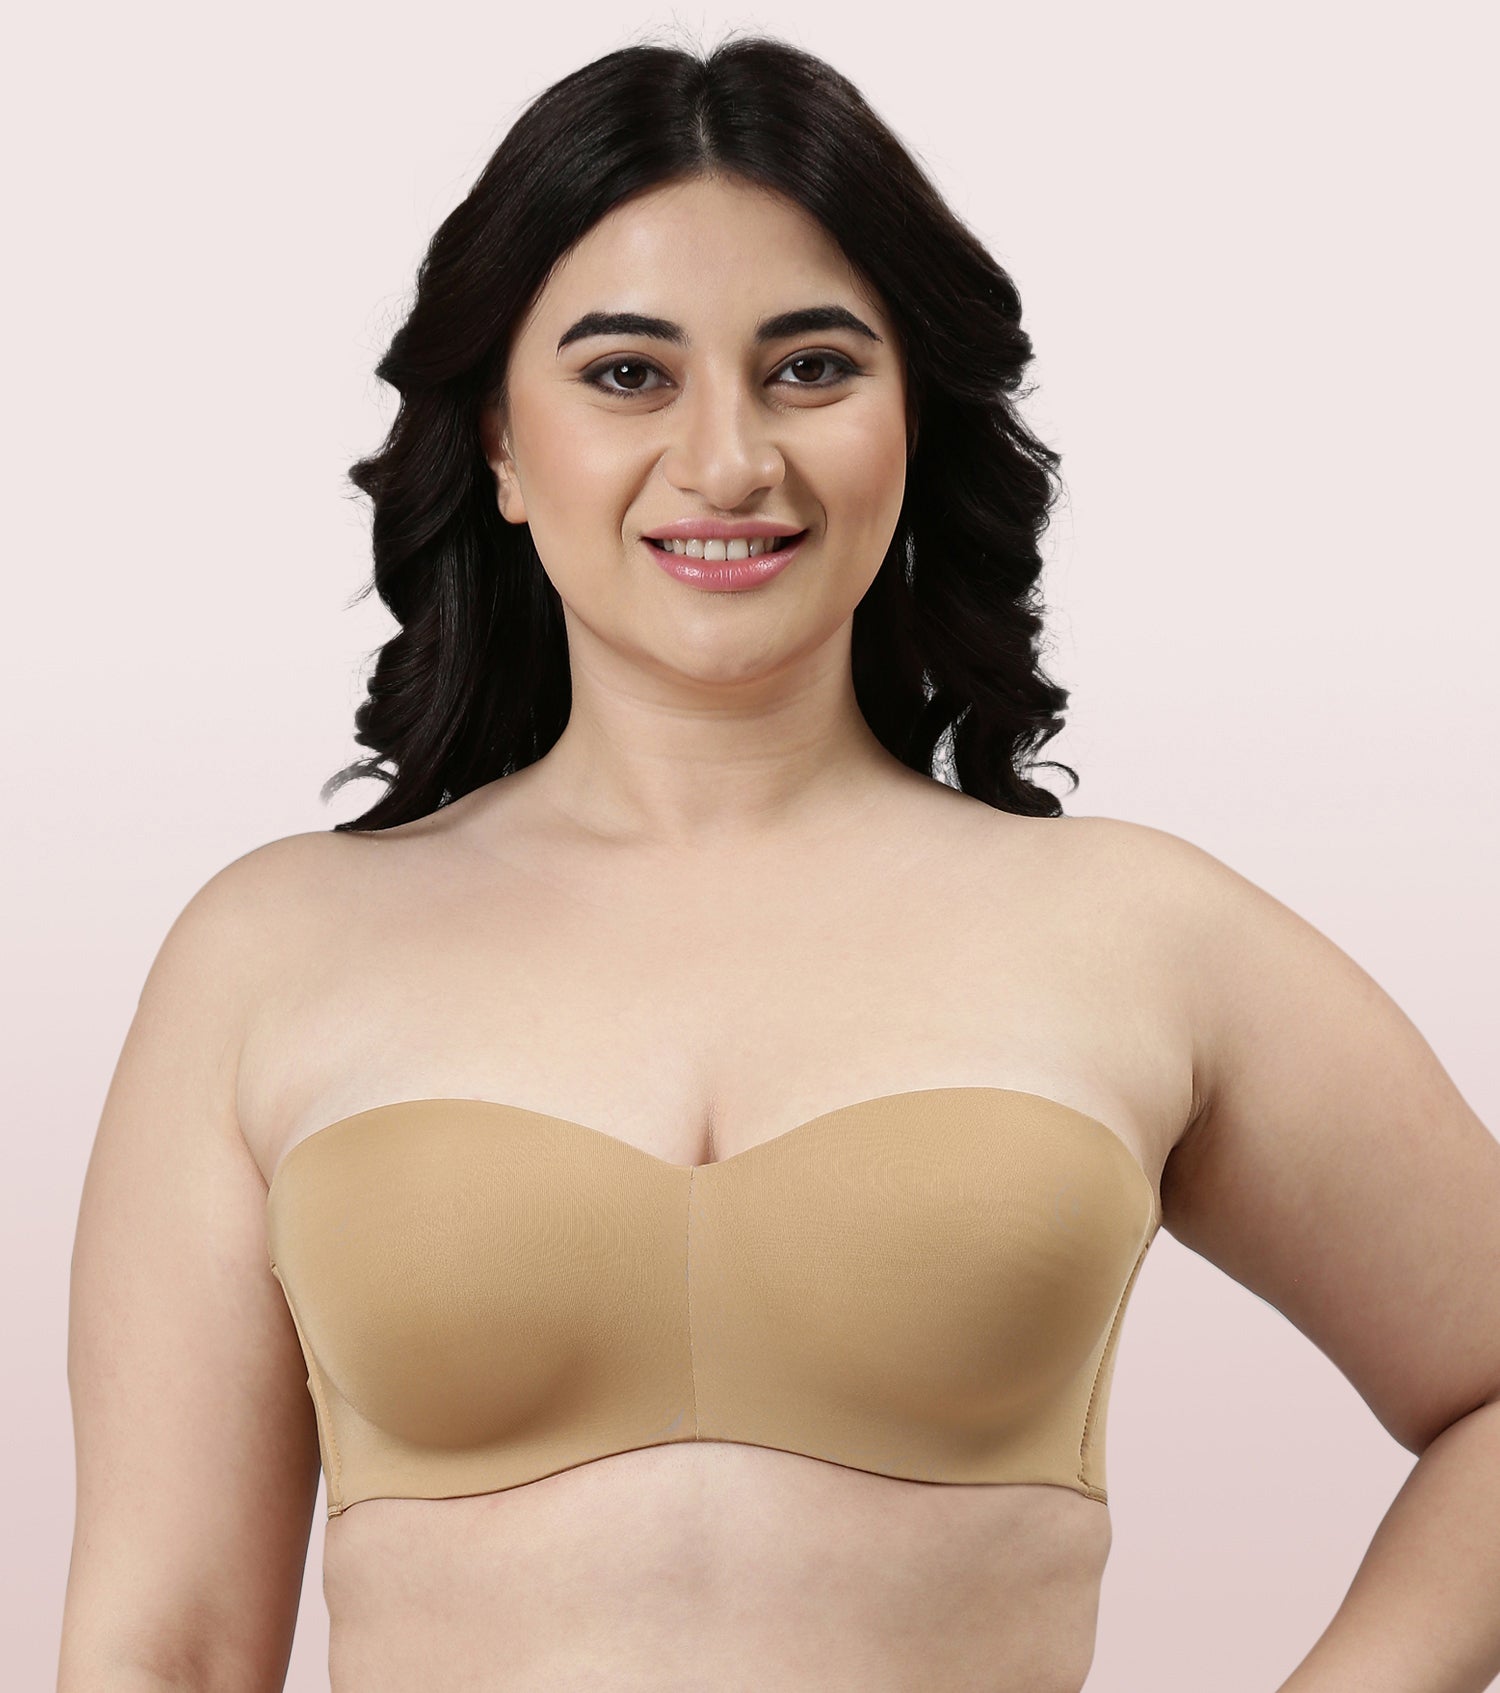 Enamor V001 T-Shirt Cotton Bra Non-Padded Wirefree Shaper panel Pack of Two  in Kolkata at best price by Trends (Axis Mall) - Justdial